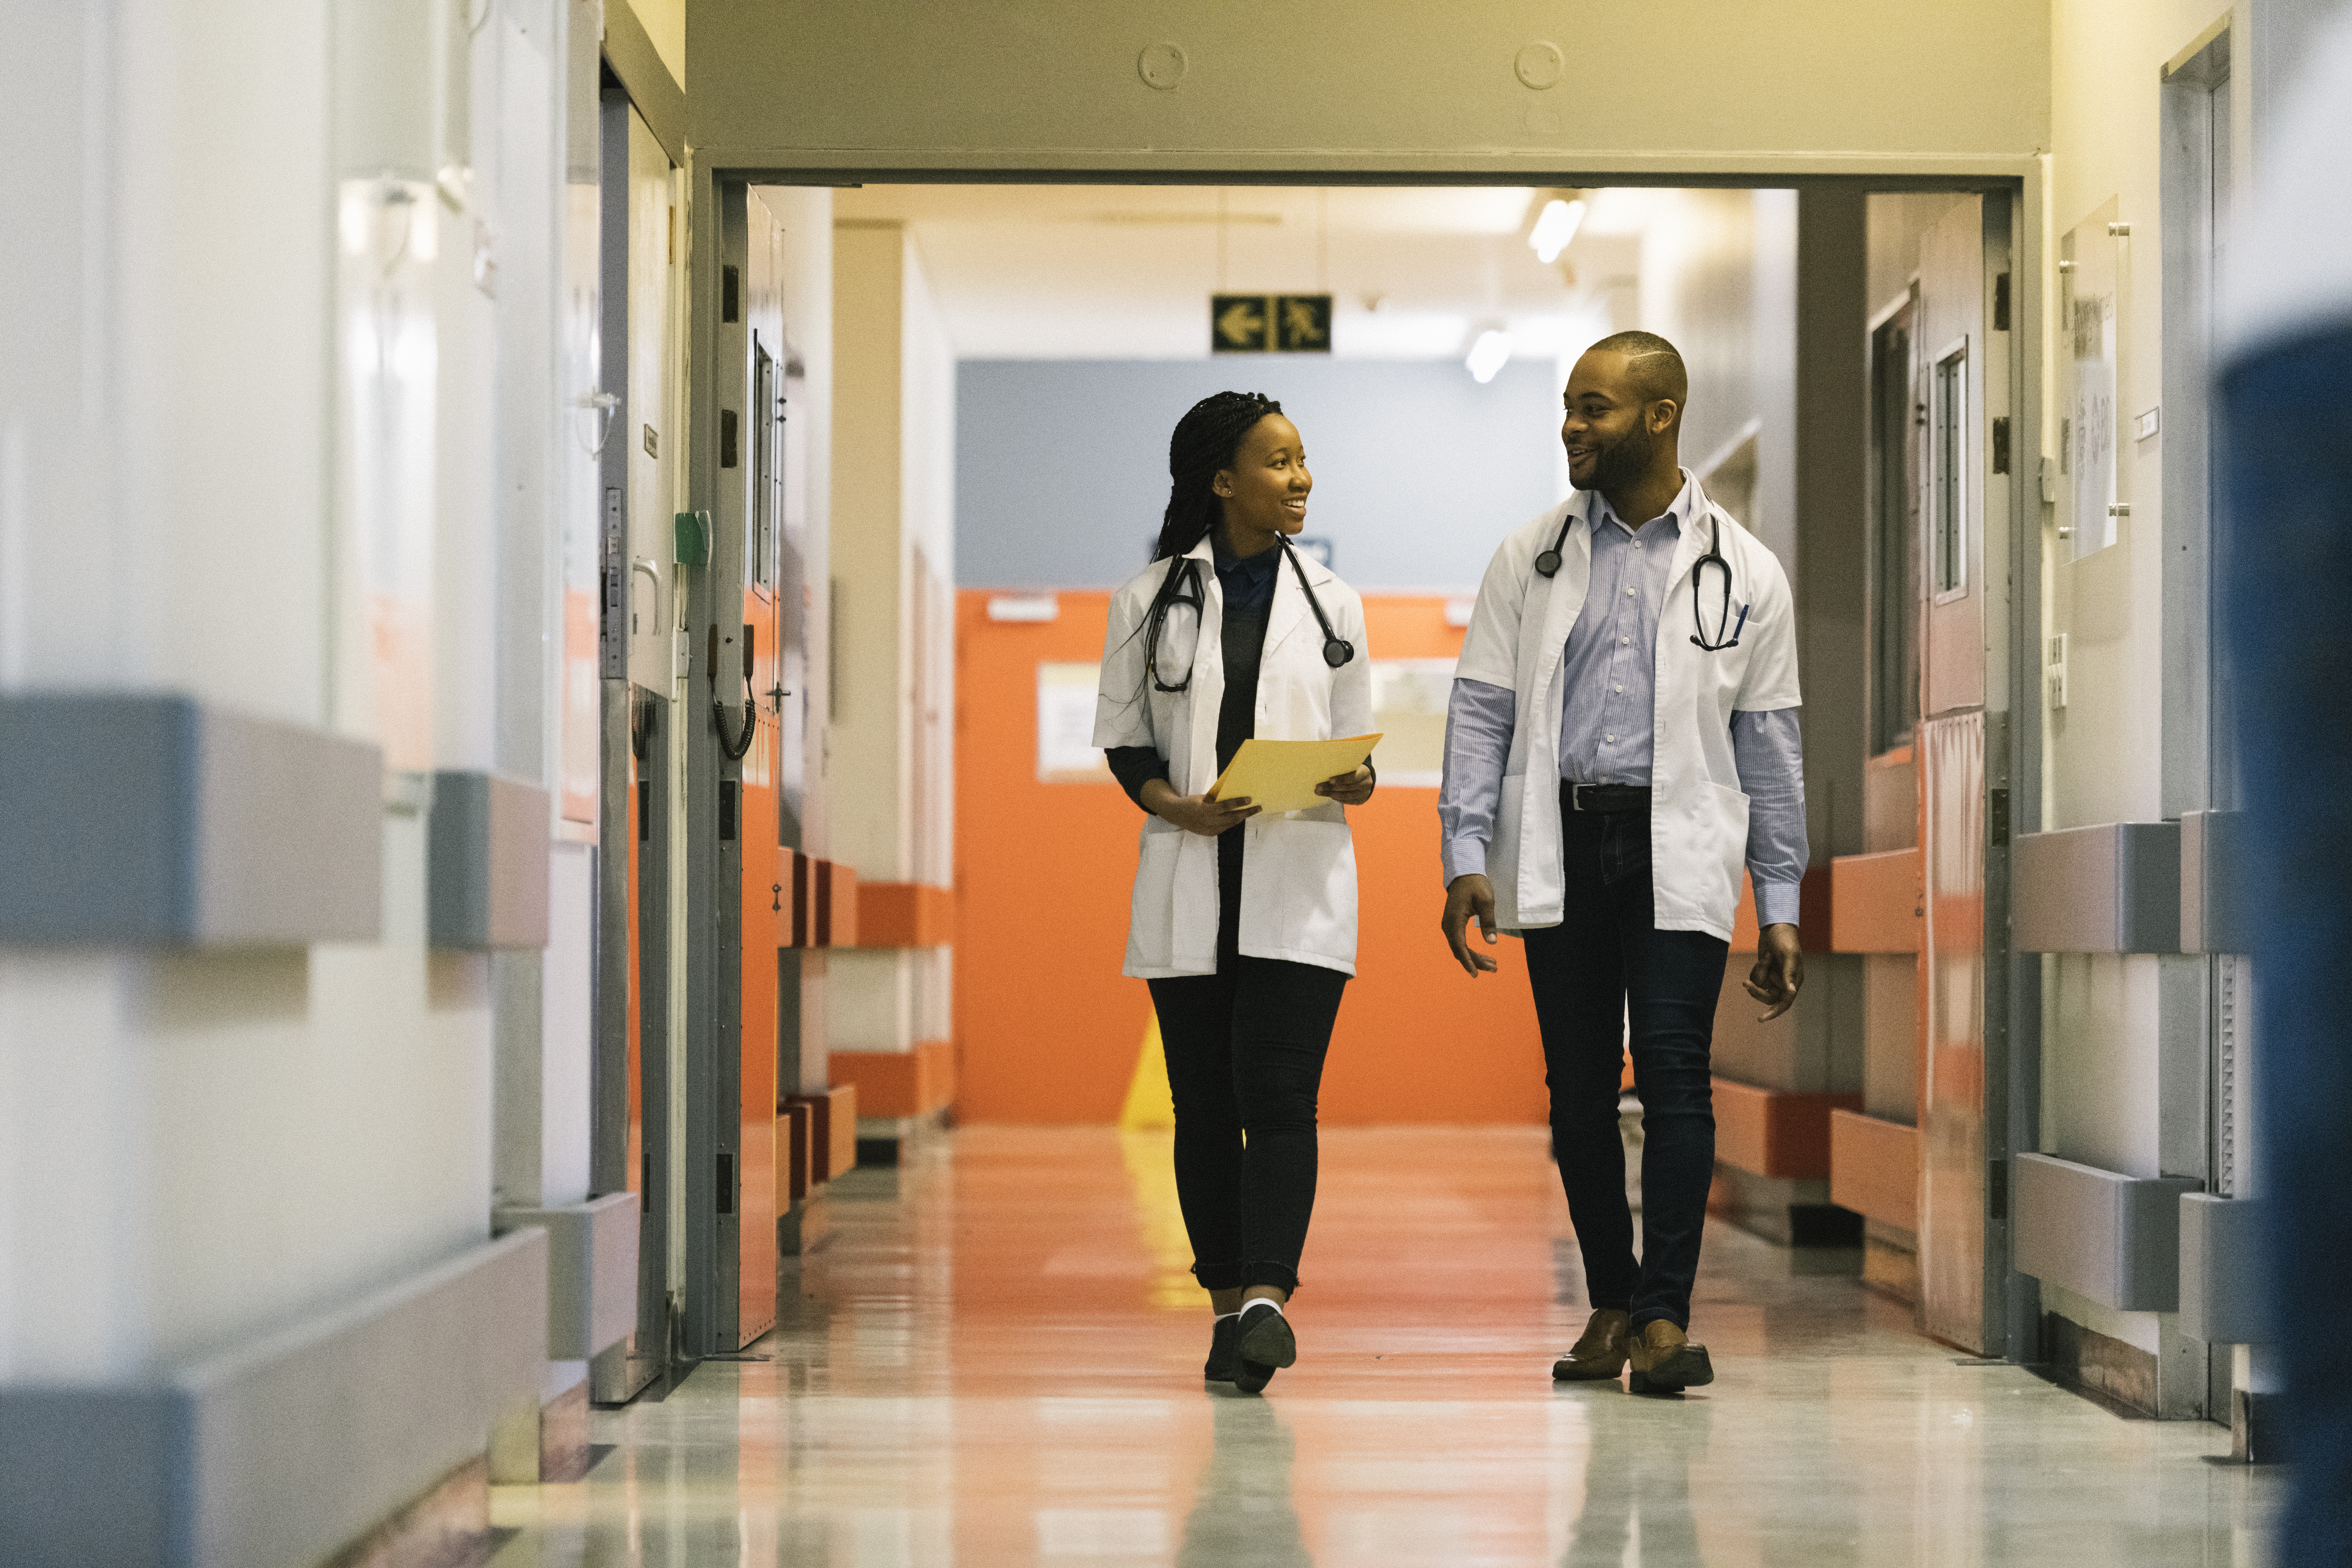 Two medical professionals talking while walking down a corridor.